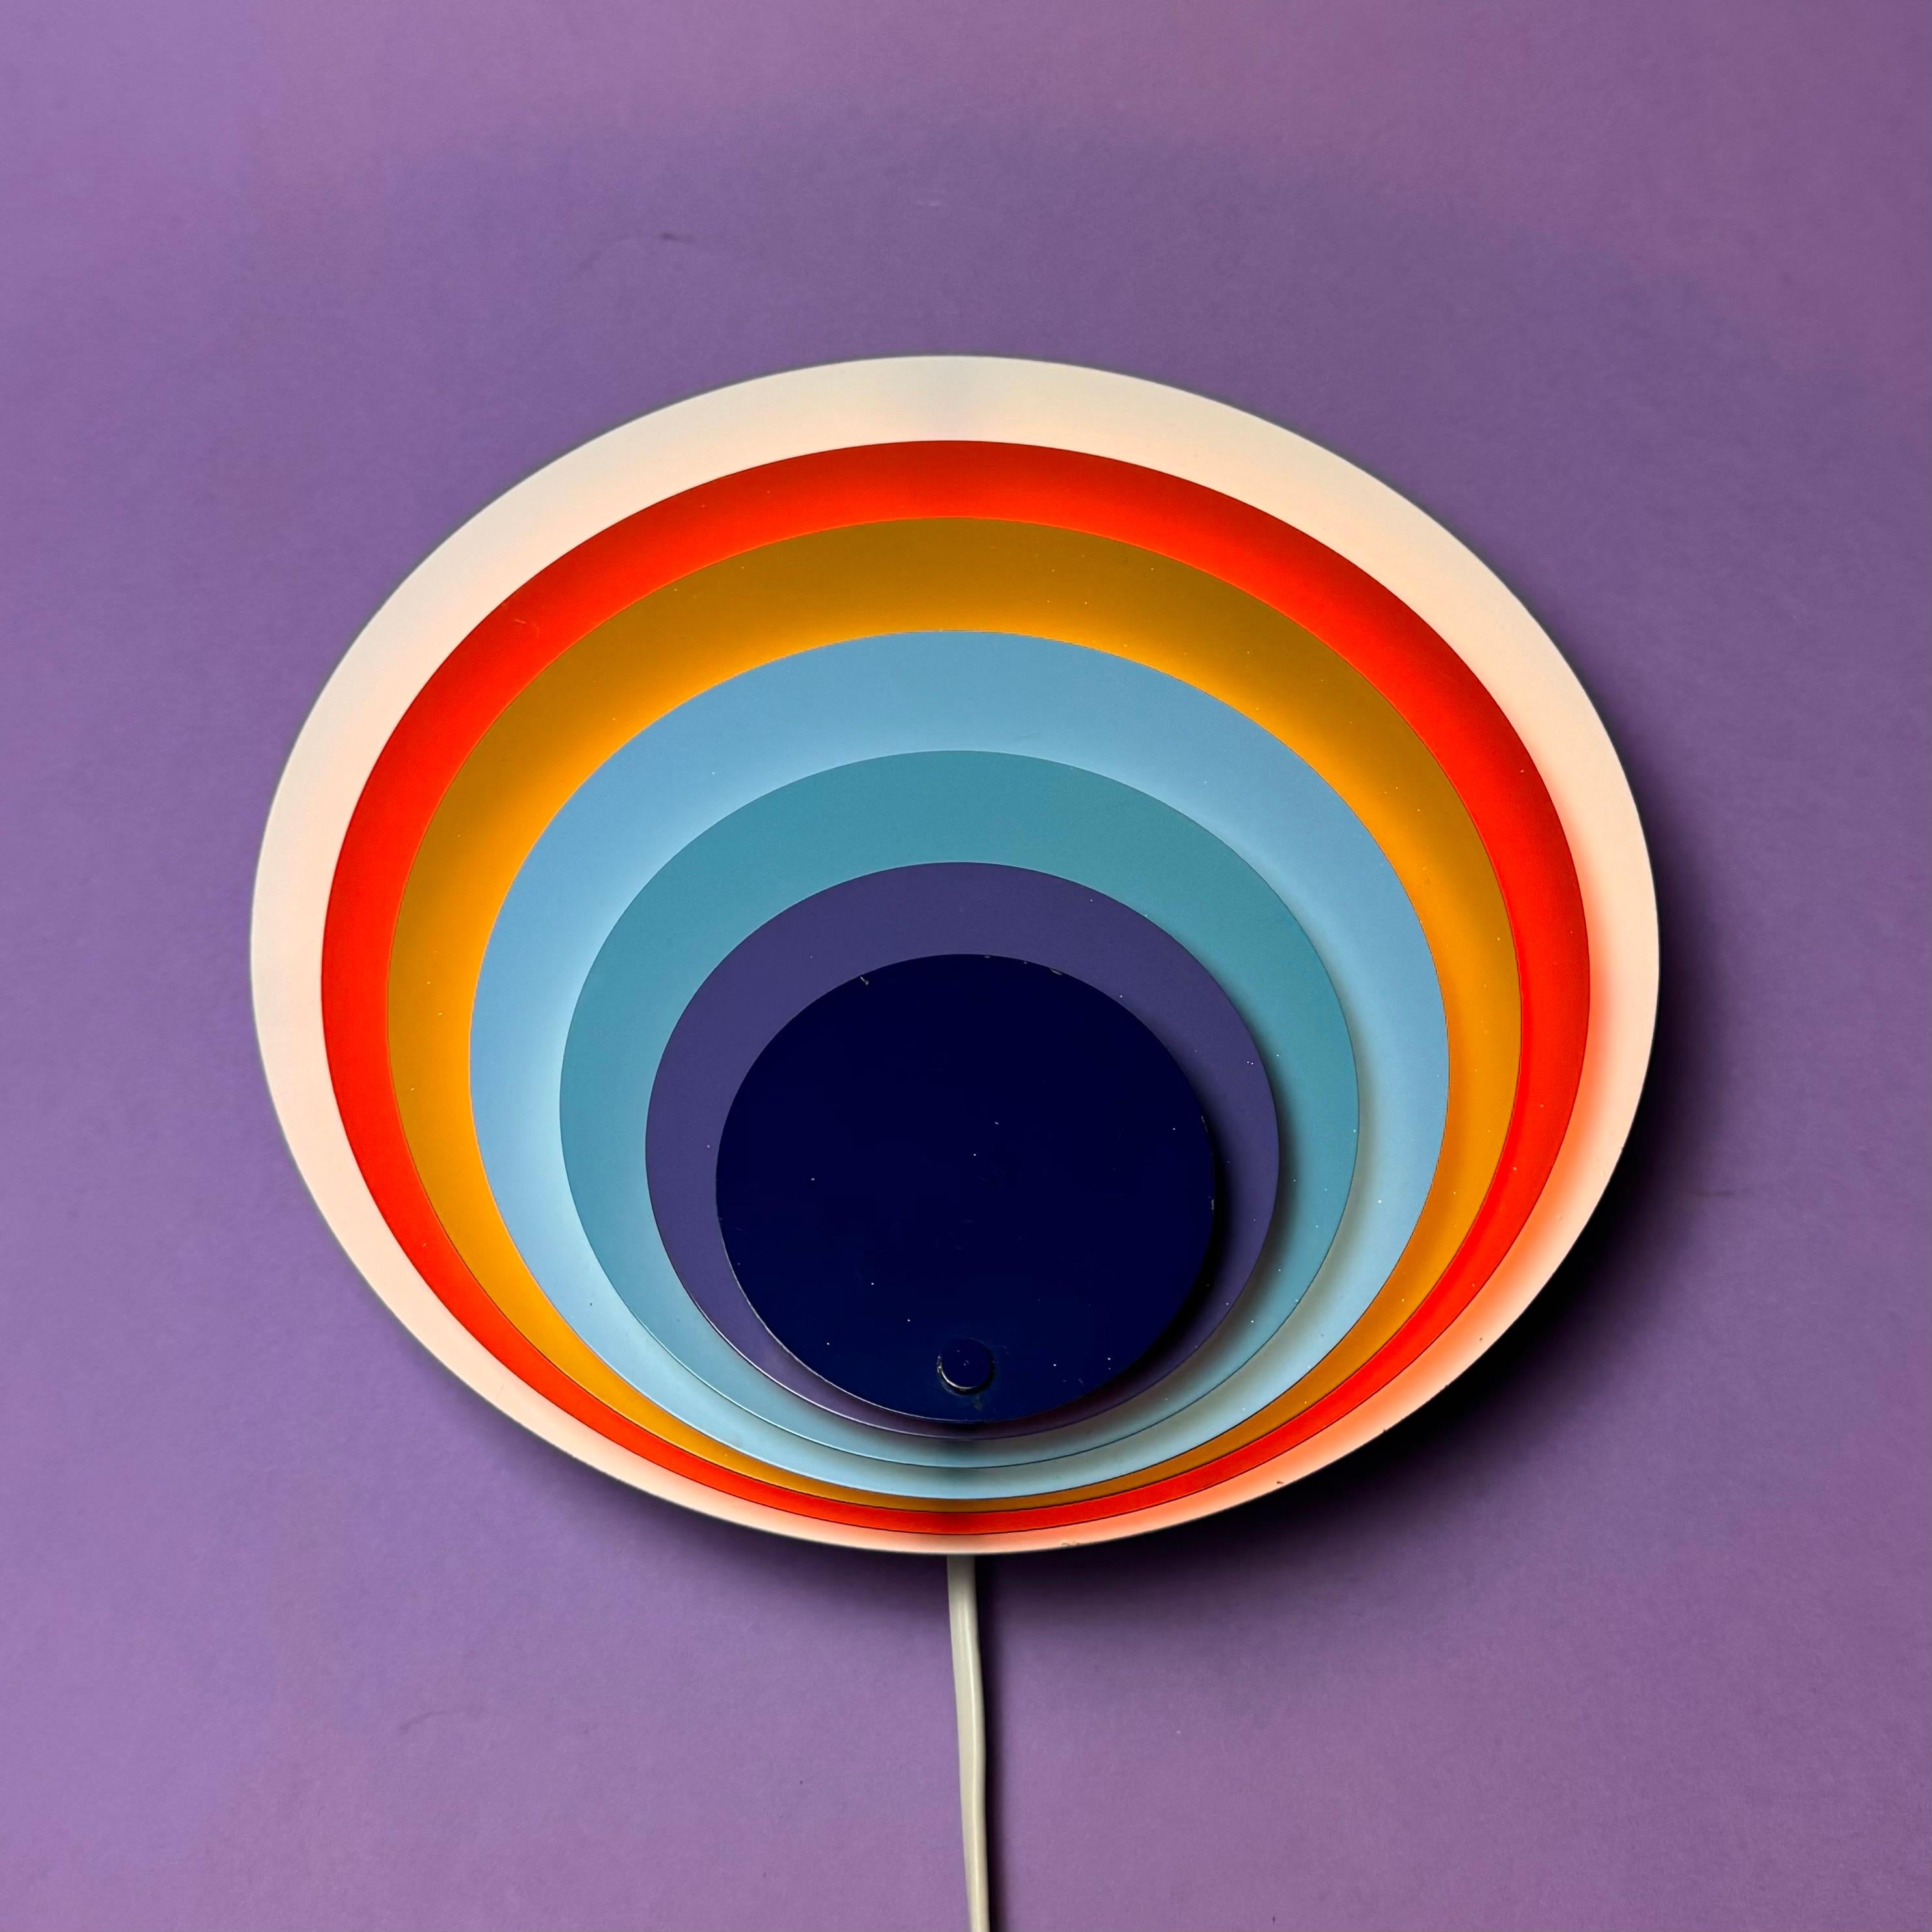 One of the most iconic danish designed wall lights from the modern era. 

The multicolored Peacock wall sconce was designed by Bent Karlby for LYFA in Denmark 1970s.

Peacock is a highly sought after design piece and very rare. 

Excellent original